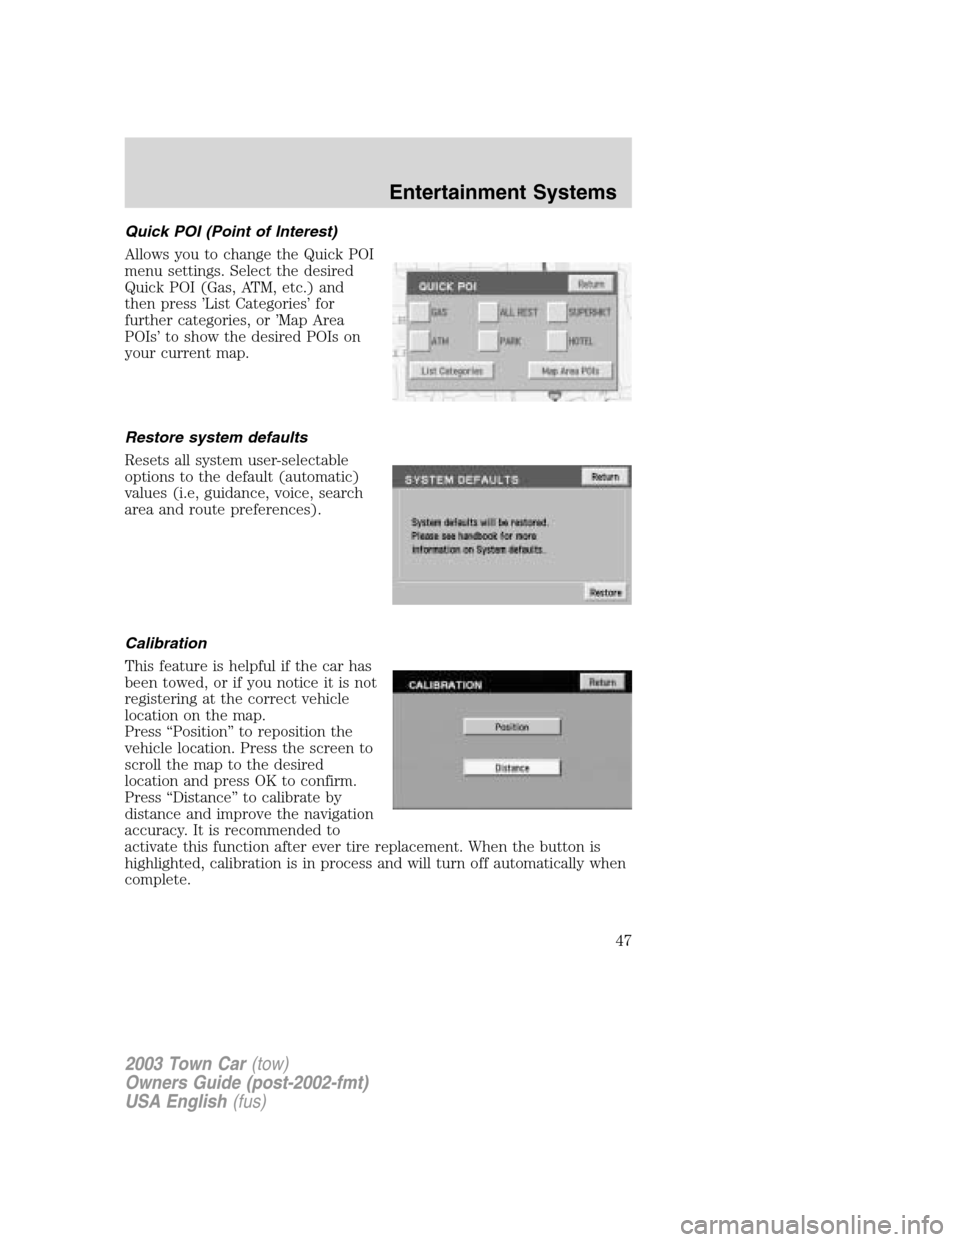 LINCOLN TOWN CAR 2003 Service Manual Quick POI (Point of Interest)
Allows you to change the Quick POI
menu settings. Select the desired
Quick POI (Gas, ATM, etc.) and
then press’List Categories’for
further categories, or’Map Area
P